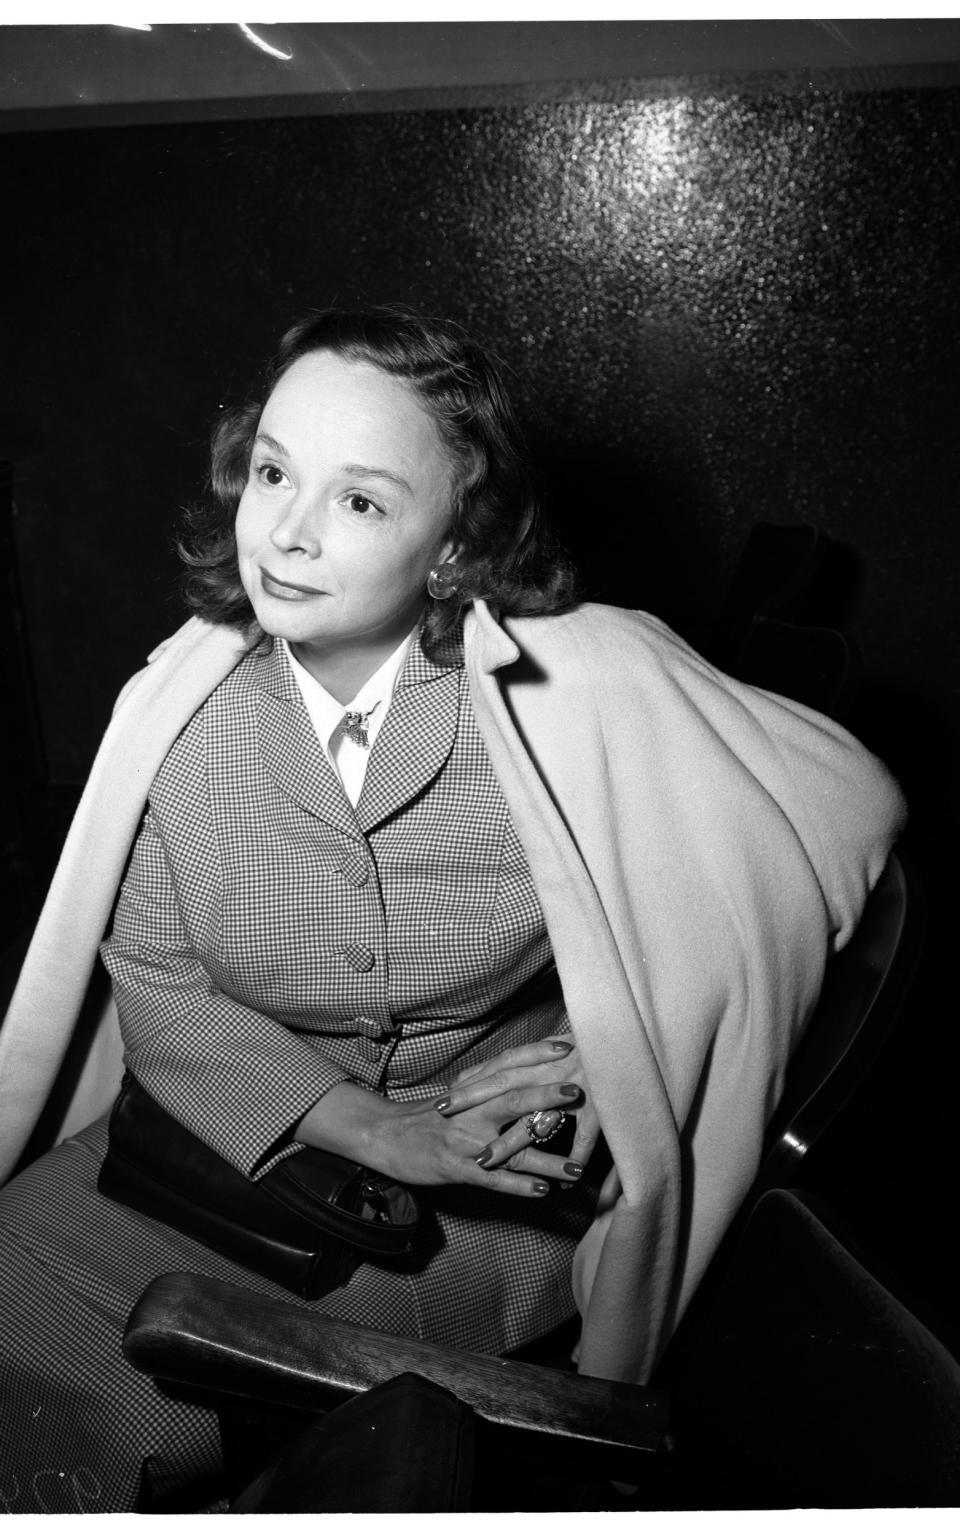 Betty Rowland during her 1952 court case, when she was sentenced to four months in jail - Los Angeles Examiner/USC Libraries/Corbis via Getty Images